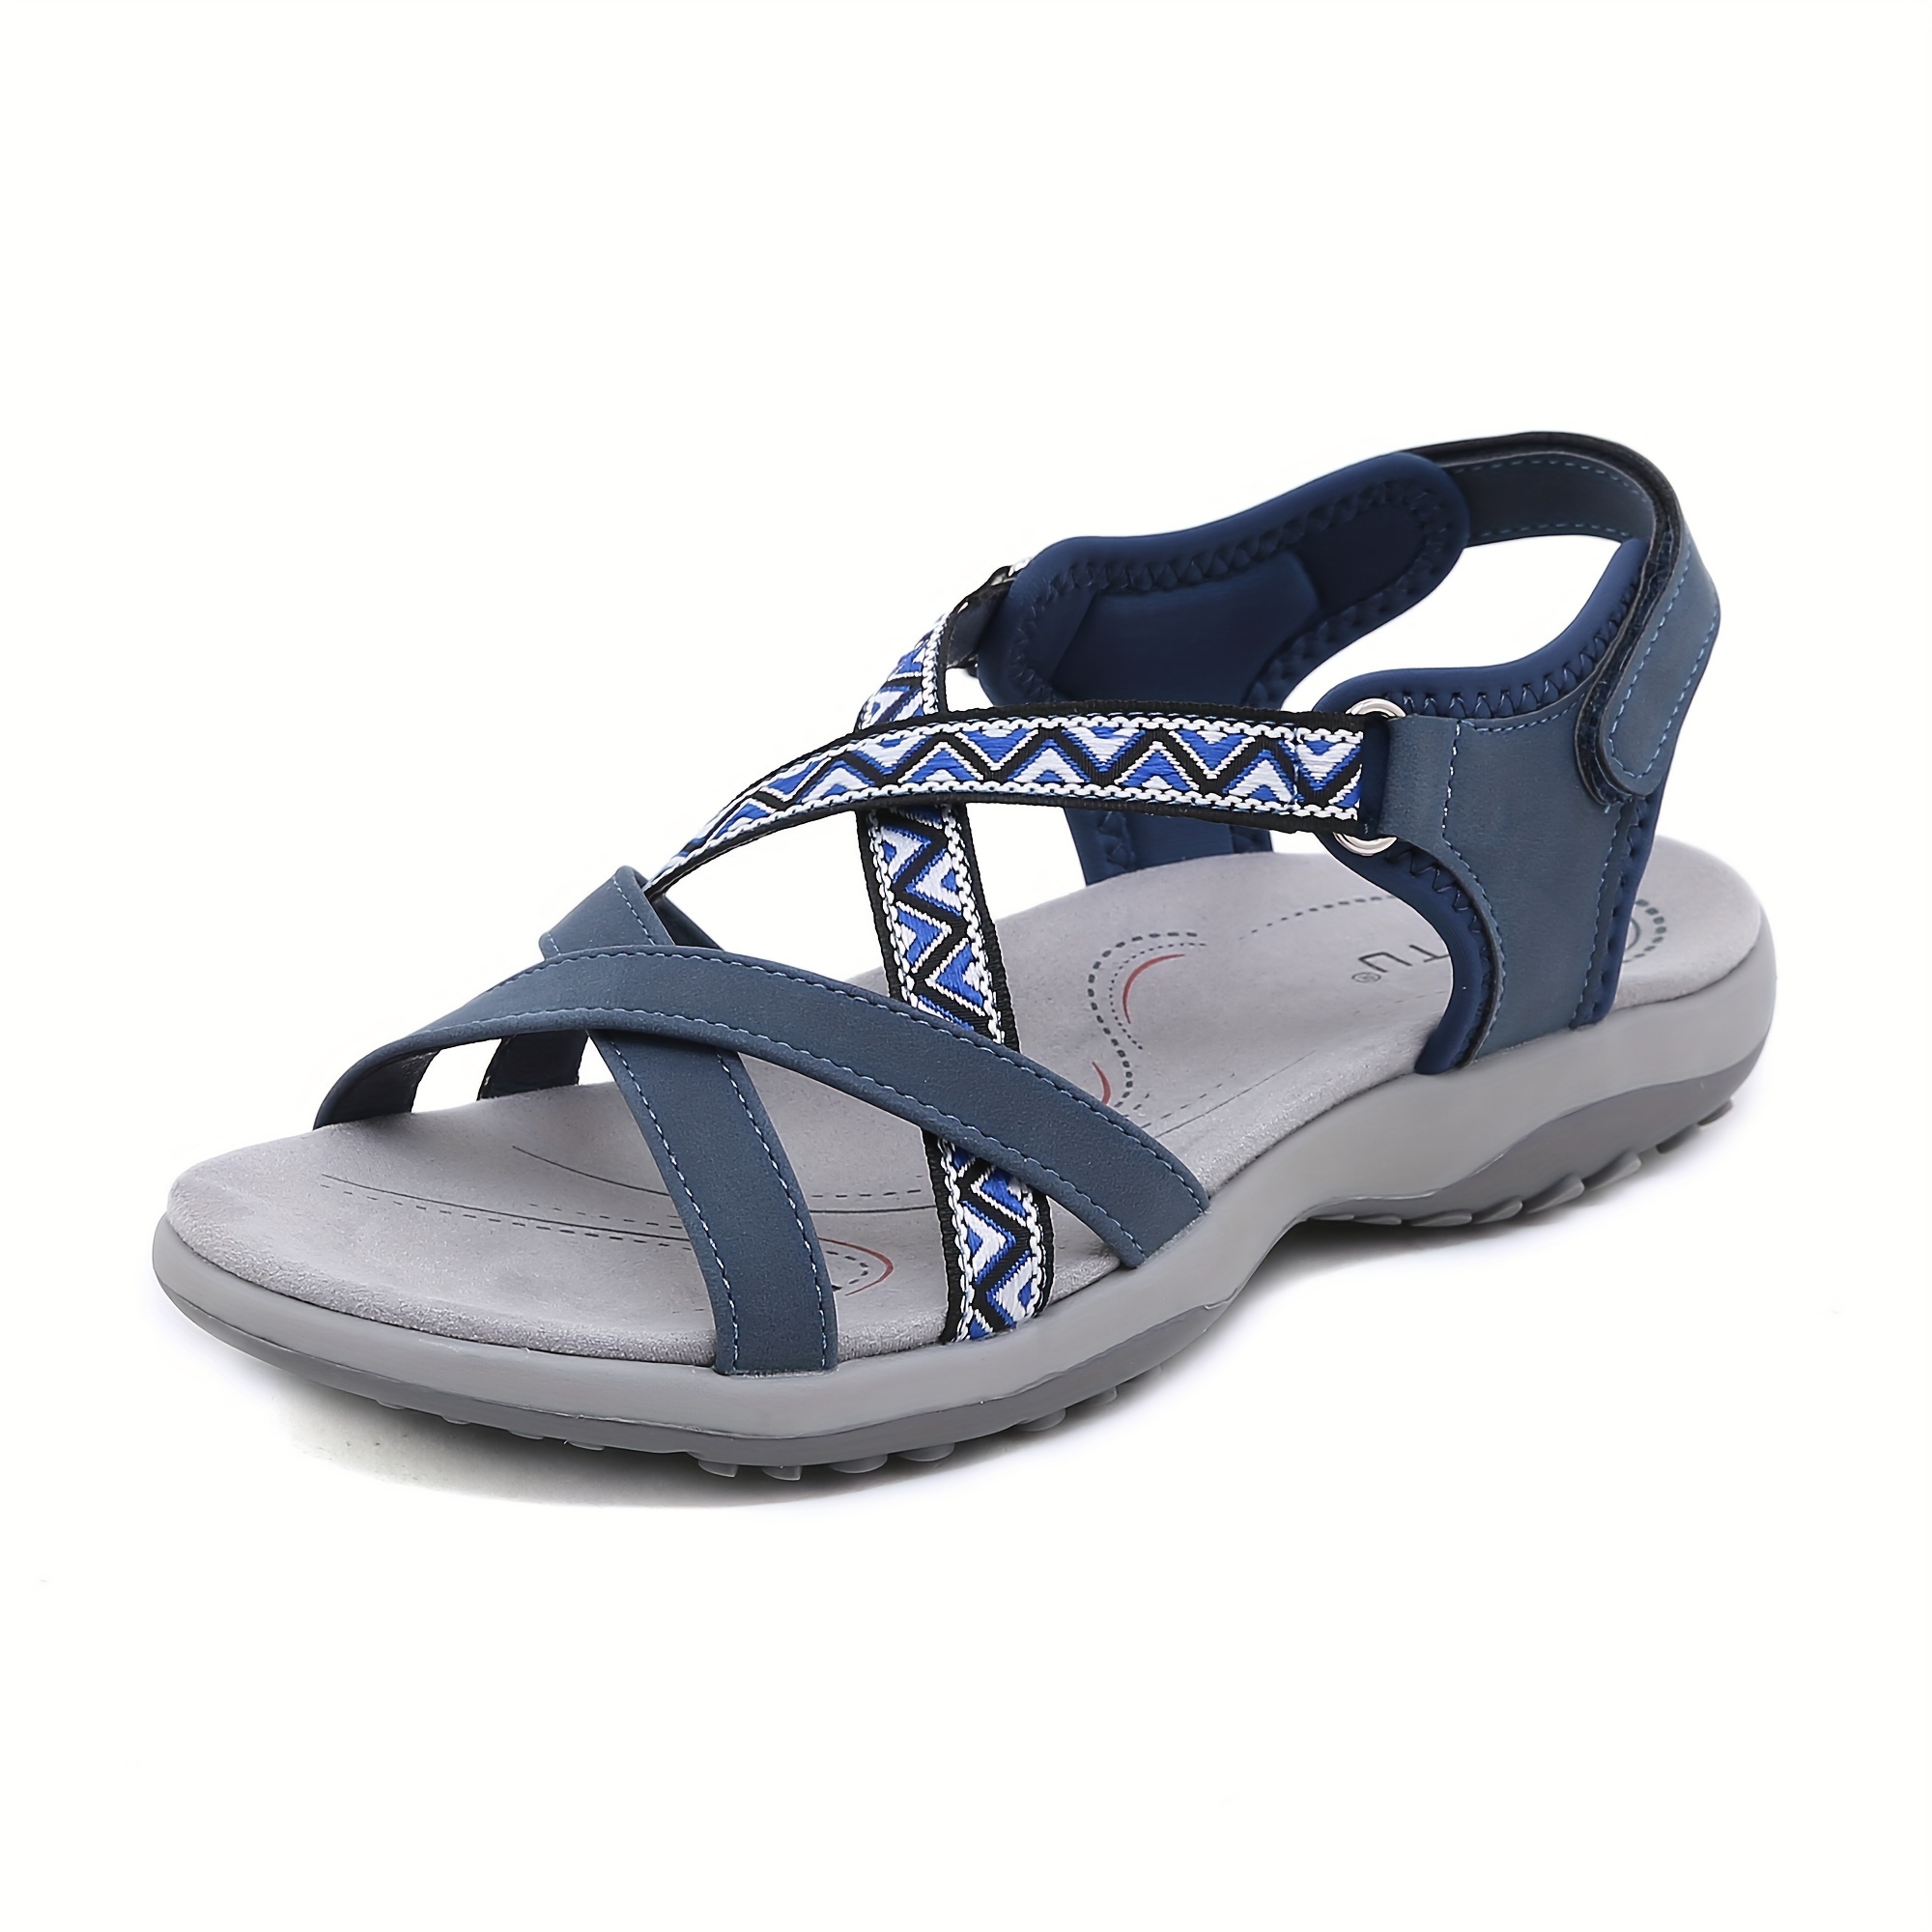 

Womens Hiking Sandal Sport Sandal Straps With Adjustable Hooks Arch Support Beach Sandals